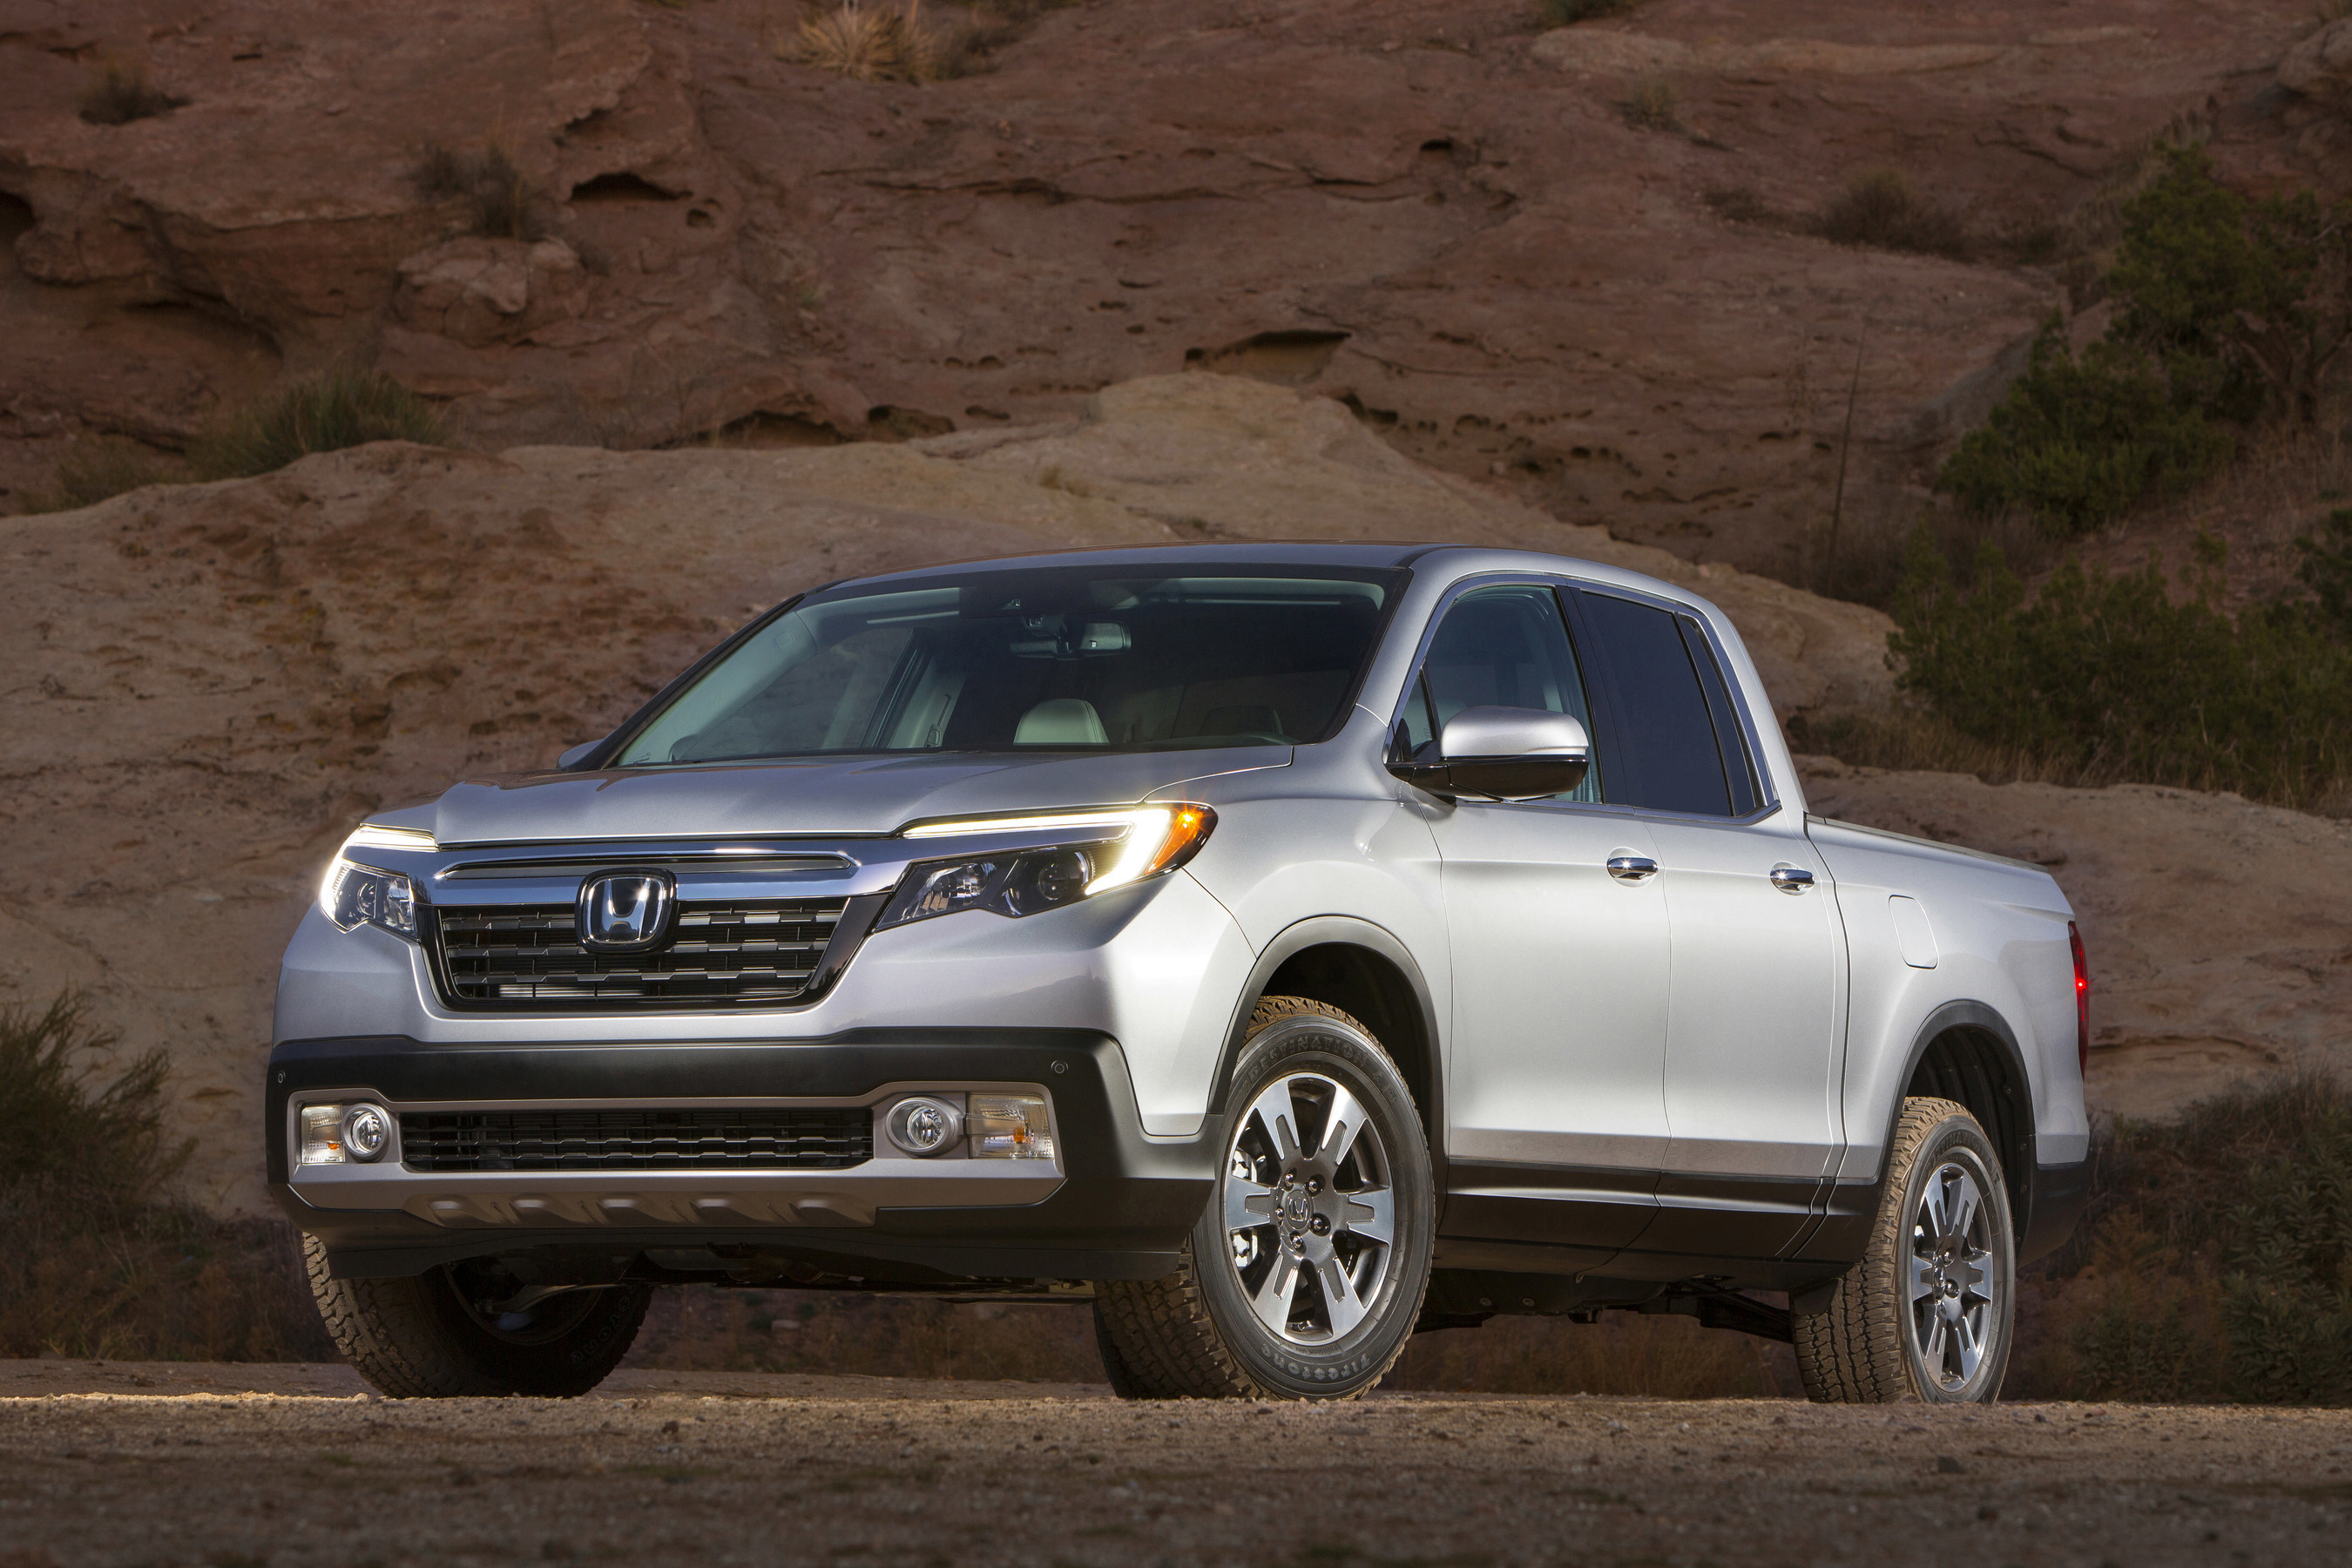 The 2017 Honda Ridgeline made its debut on January 11 at the 2016 North American Auto Show in Detroit.